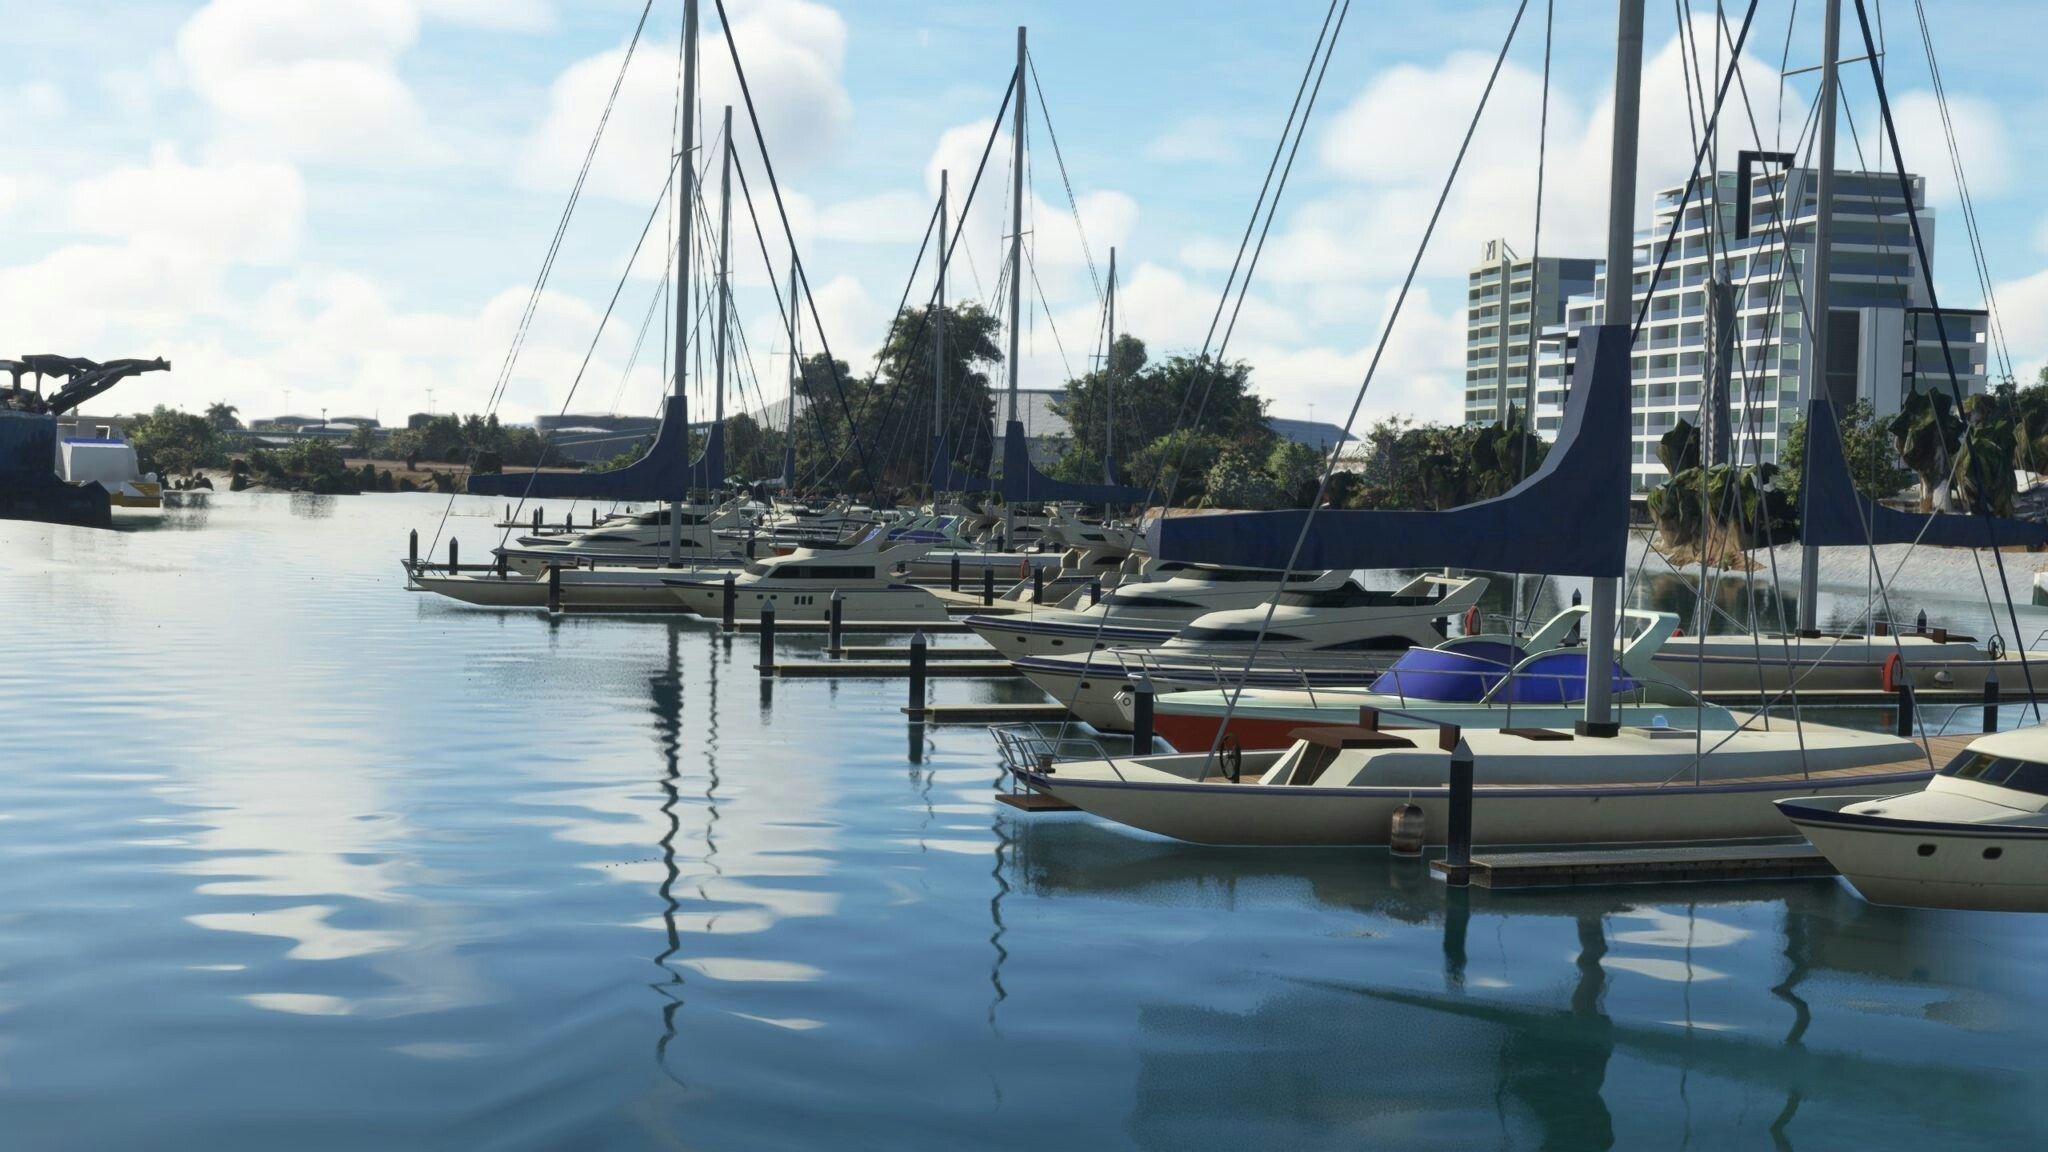 Impulse Simulations Releases Landmarks Townsville for MSFS